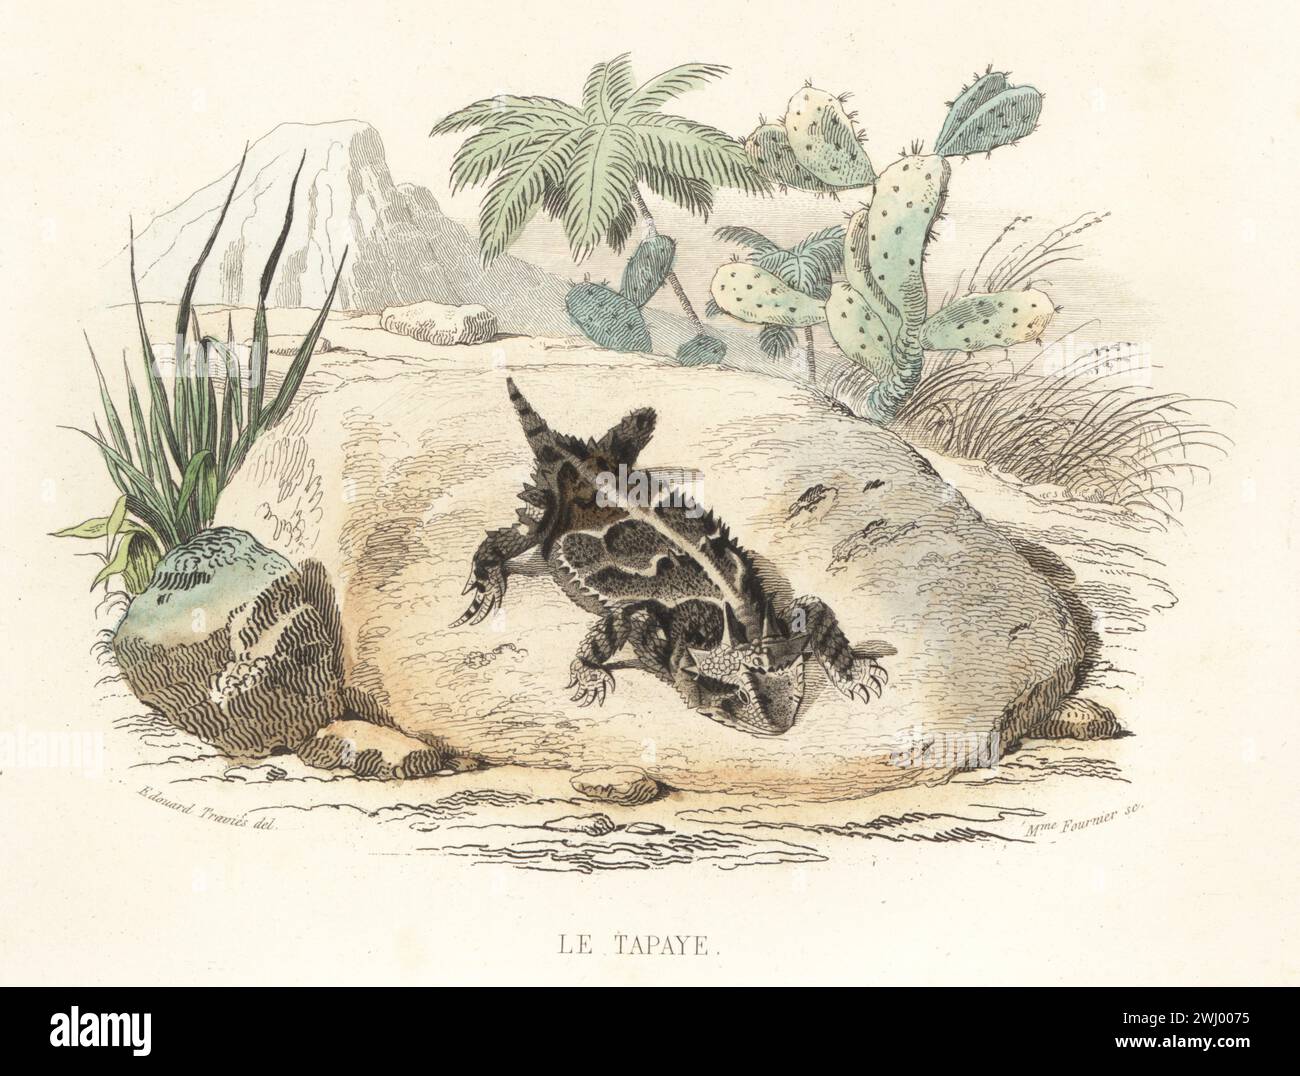 Mexican Plateau horned lizard or Chihuahua Desert horned lizard, Phrynosoma orbiculare. Palm tree and cactus in the background. Le tapaye, Pequeño dragón, Tapaya orbicularis. Handcoloured steel engraving by Madame Félicie Fournier after an illustration by Edouard Travies from Bernard Germain de Lacepede’s Histoire Naturelle de Lacepede, comprenant les cetaces, les quadrupedes ovipares, les serpents et les poissons, Furne et Cie, Paris, 1847. Stock Photo